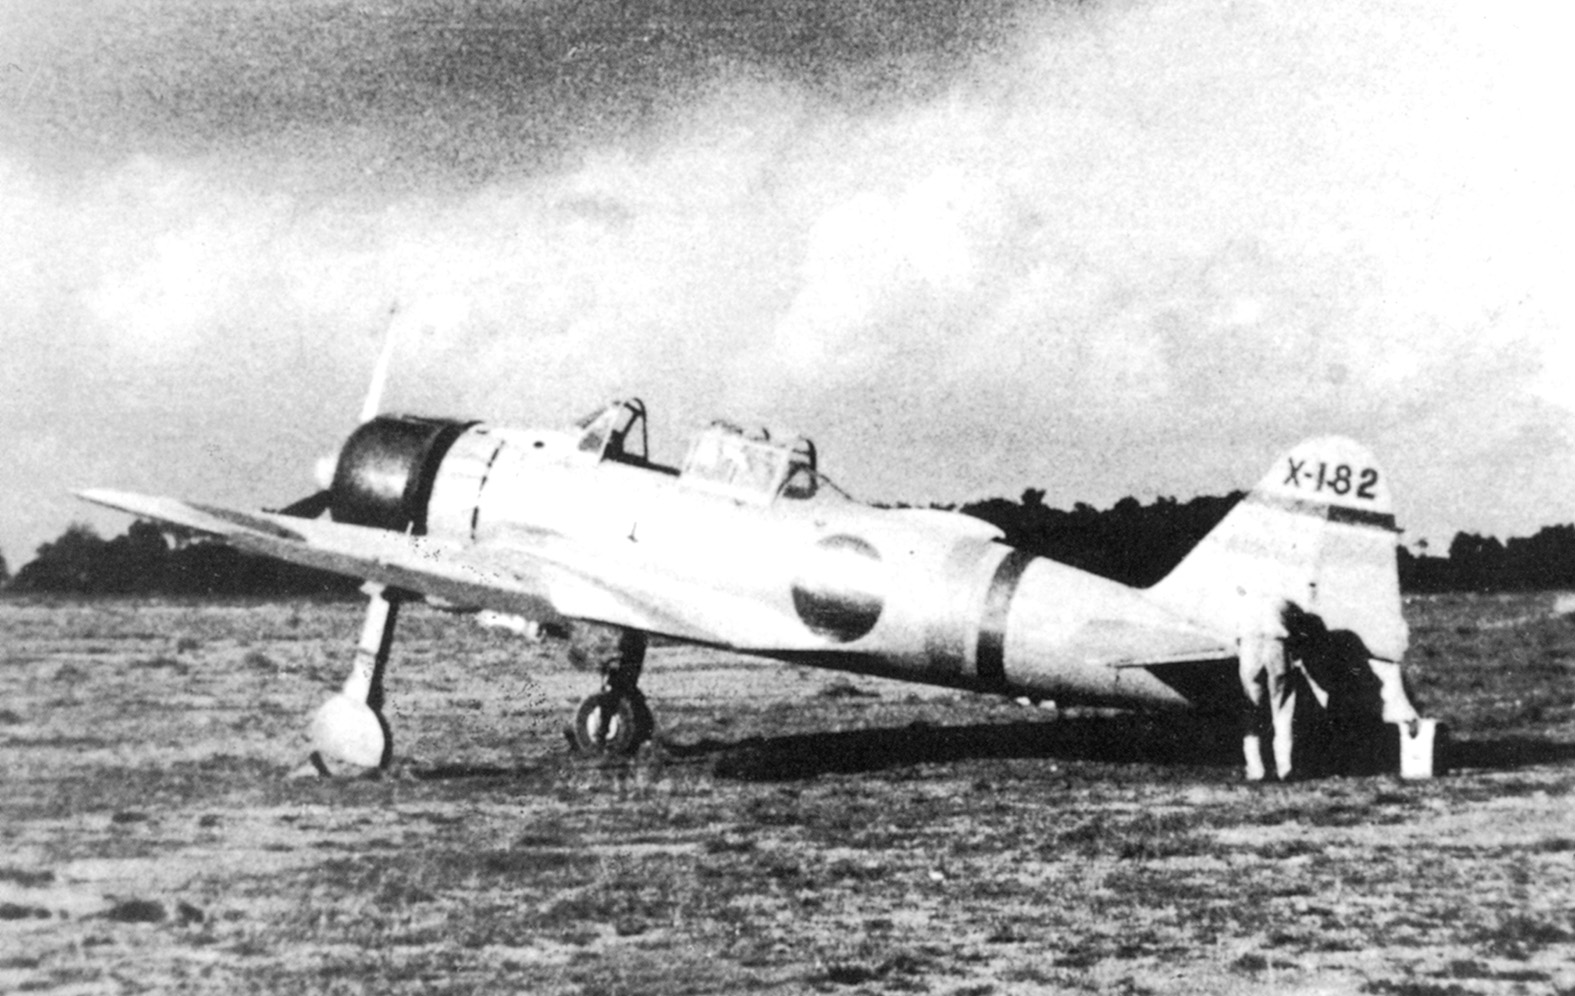 The sleek Zero was master of the skies over the Pacific in the early months of the war and, in the hands of a skilled pilot, remained a formidable foe to the end.